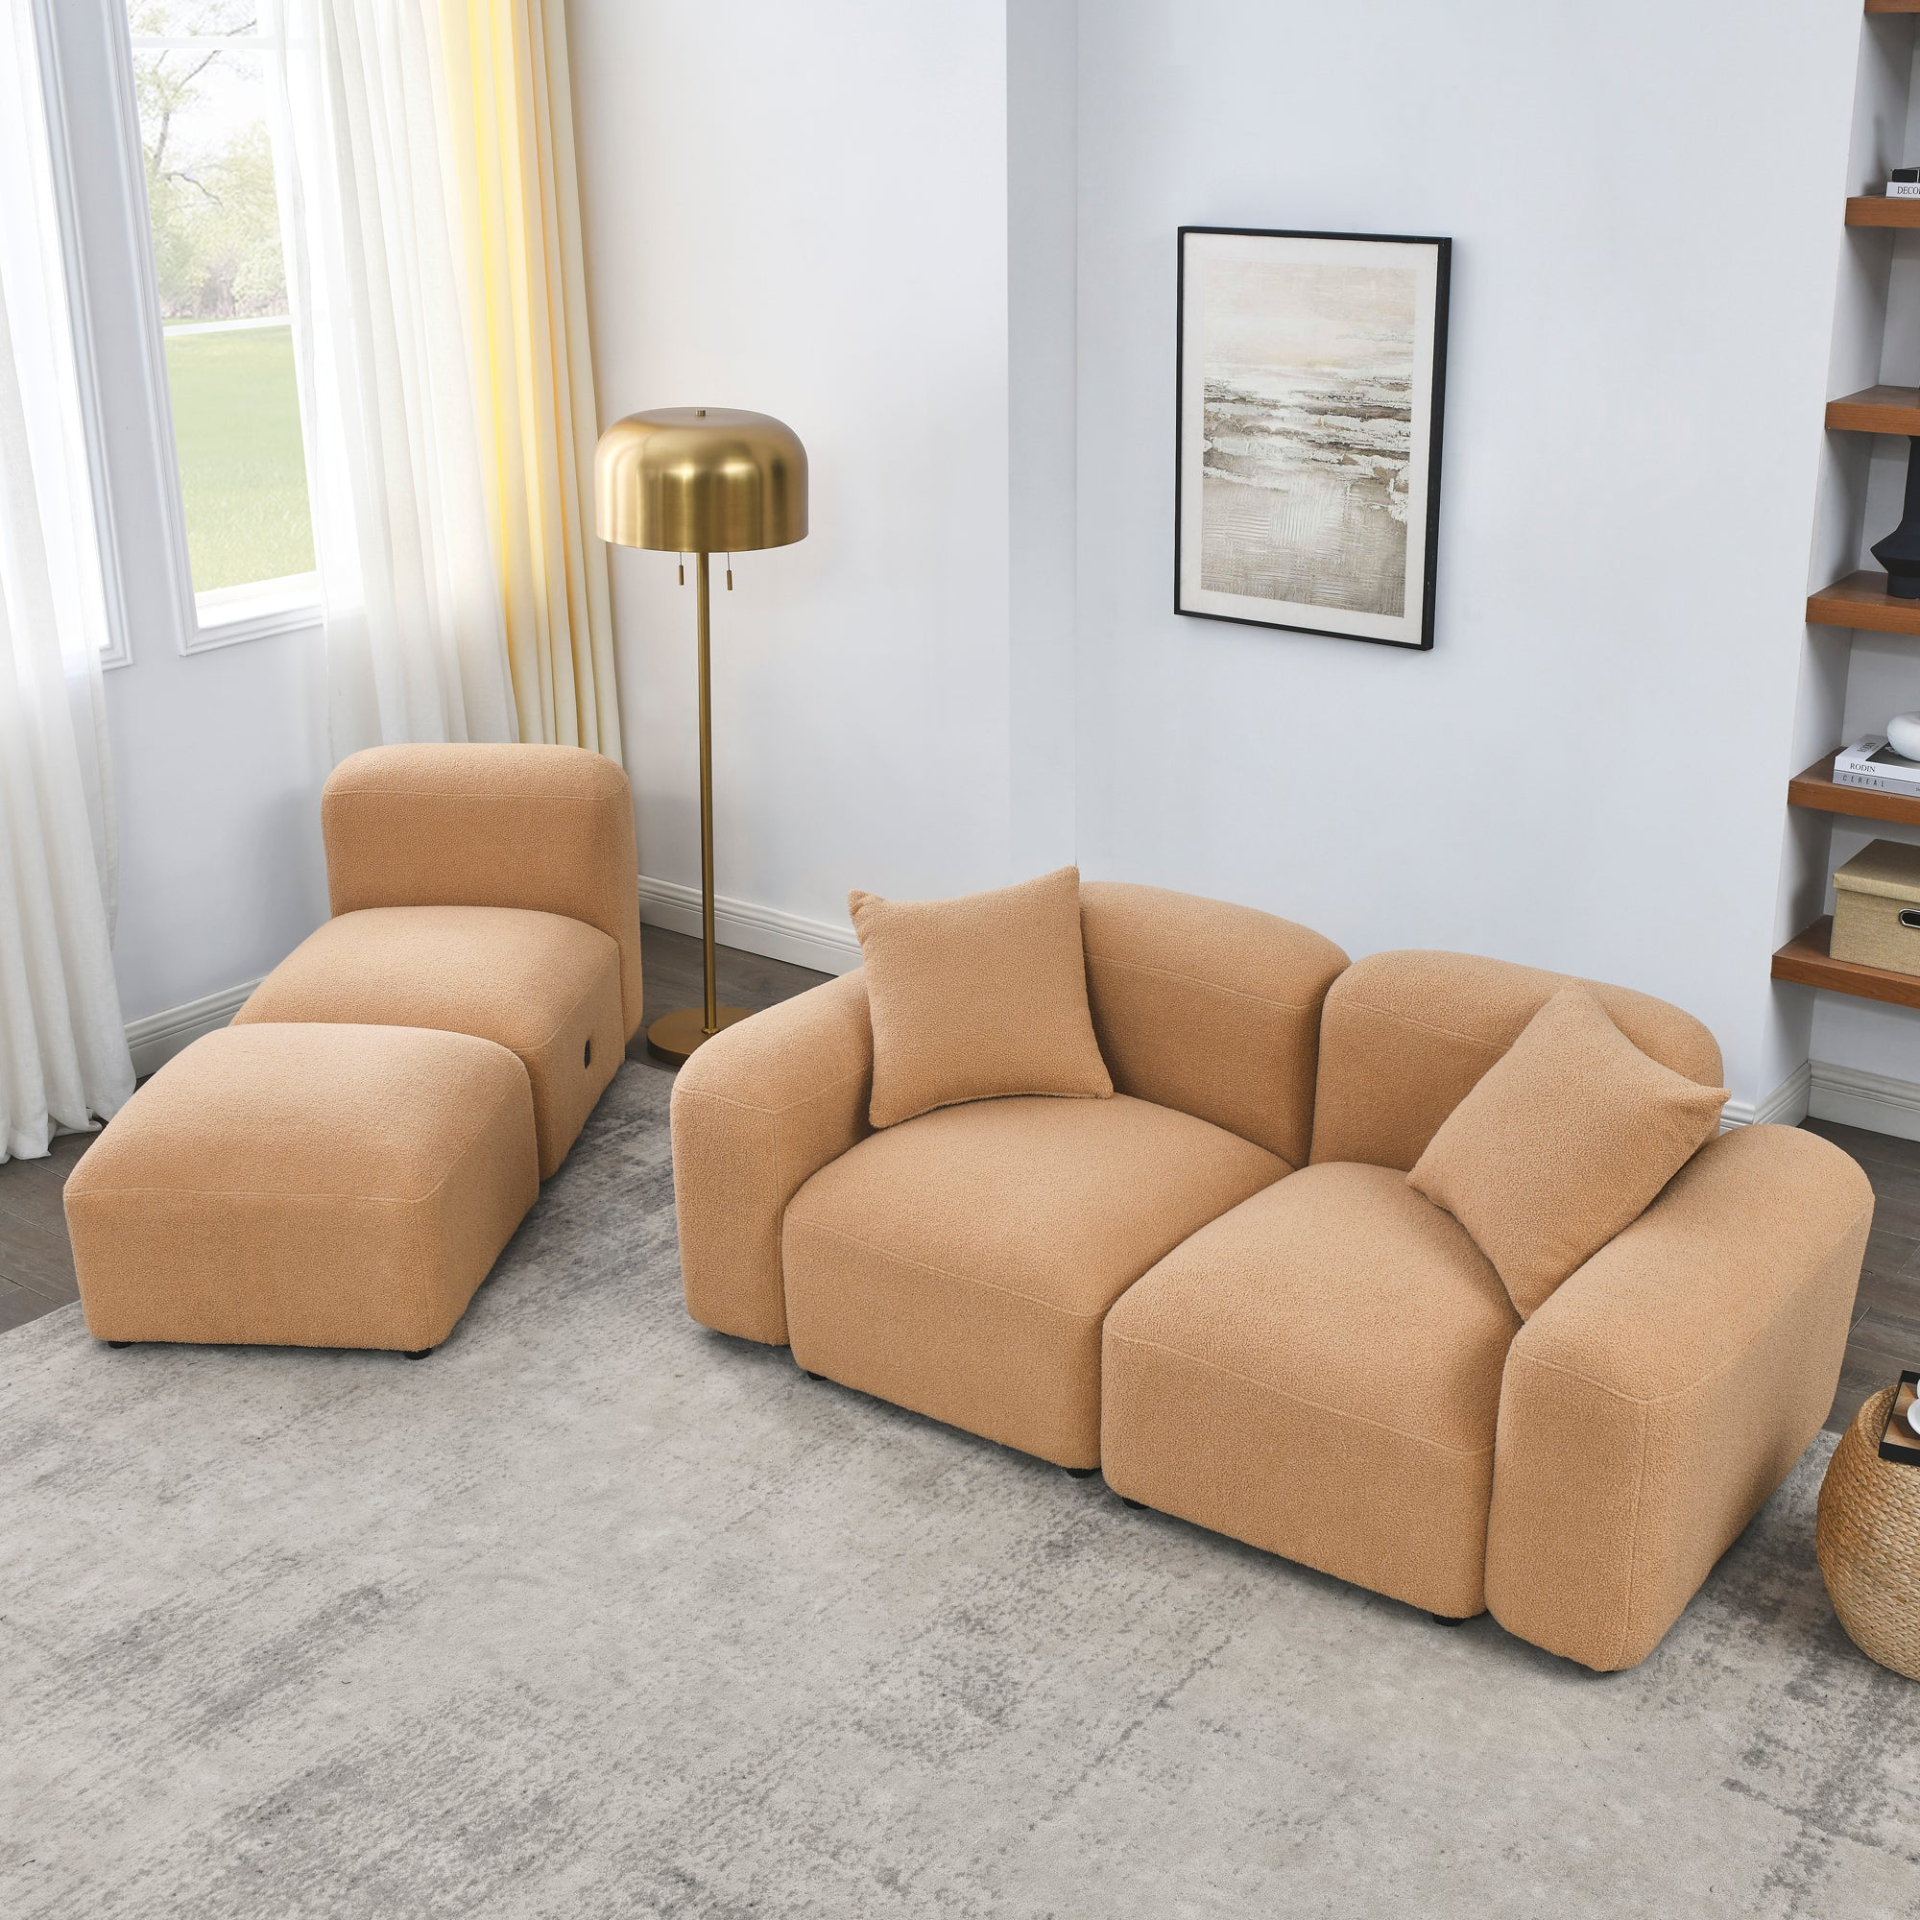 Caramel: Cozy L-Shape Modular Style Sectional Sofa with DIY Combination (94.5" x 58")